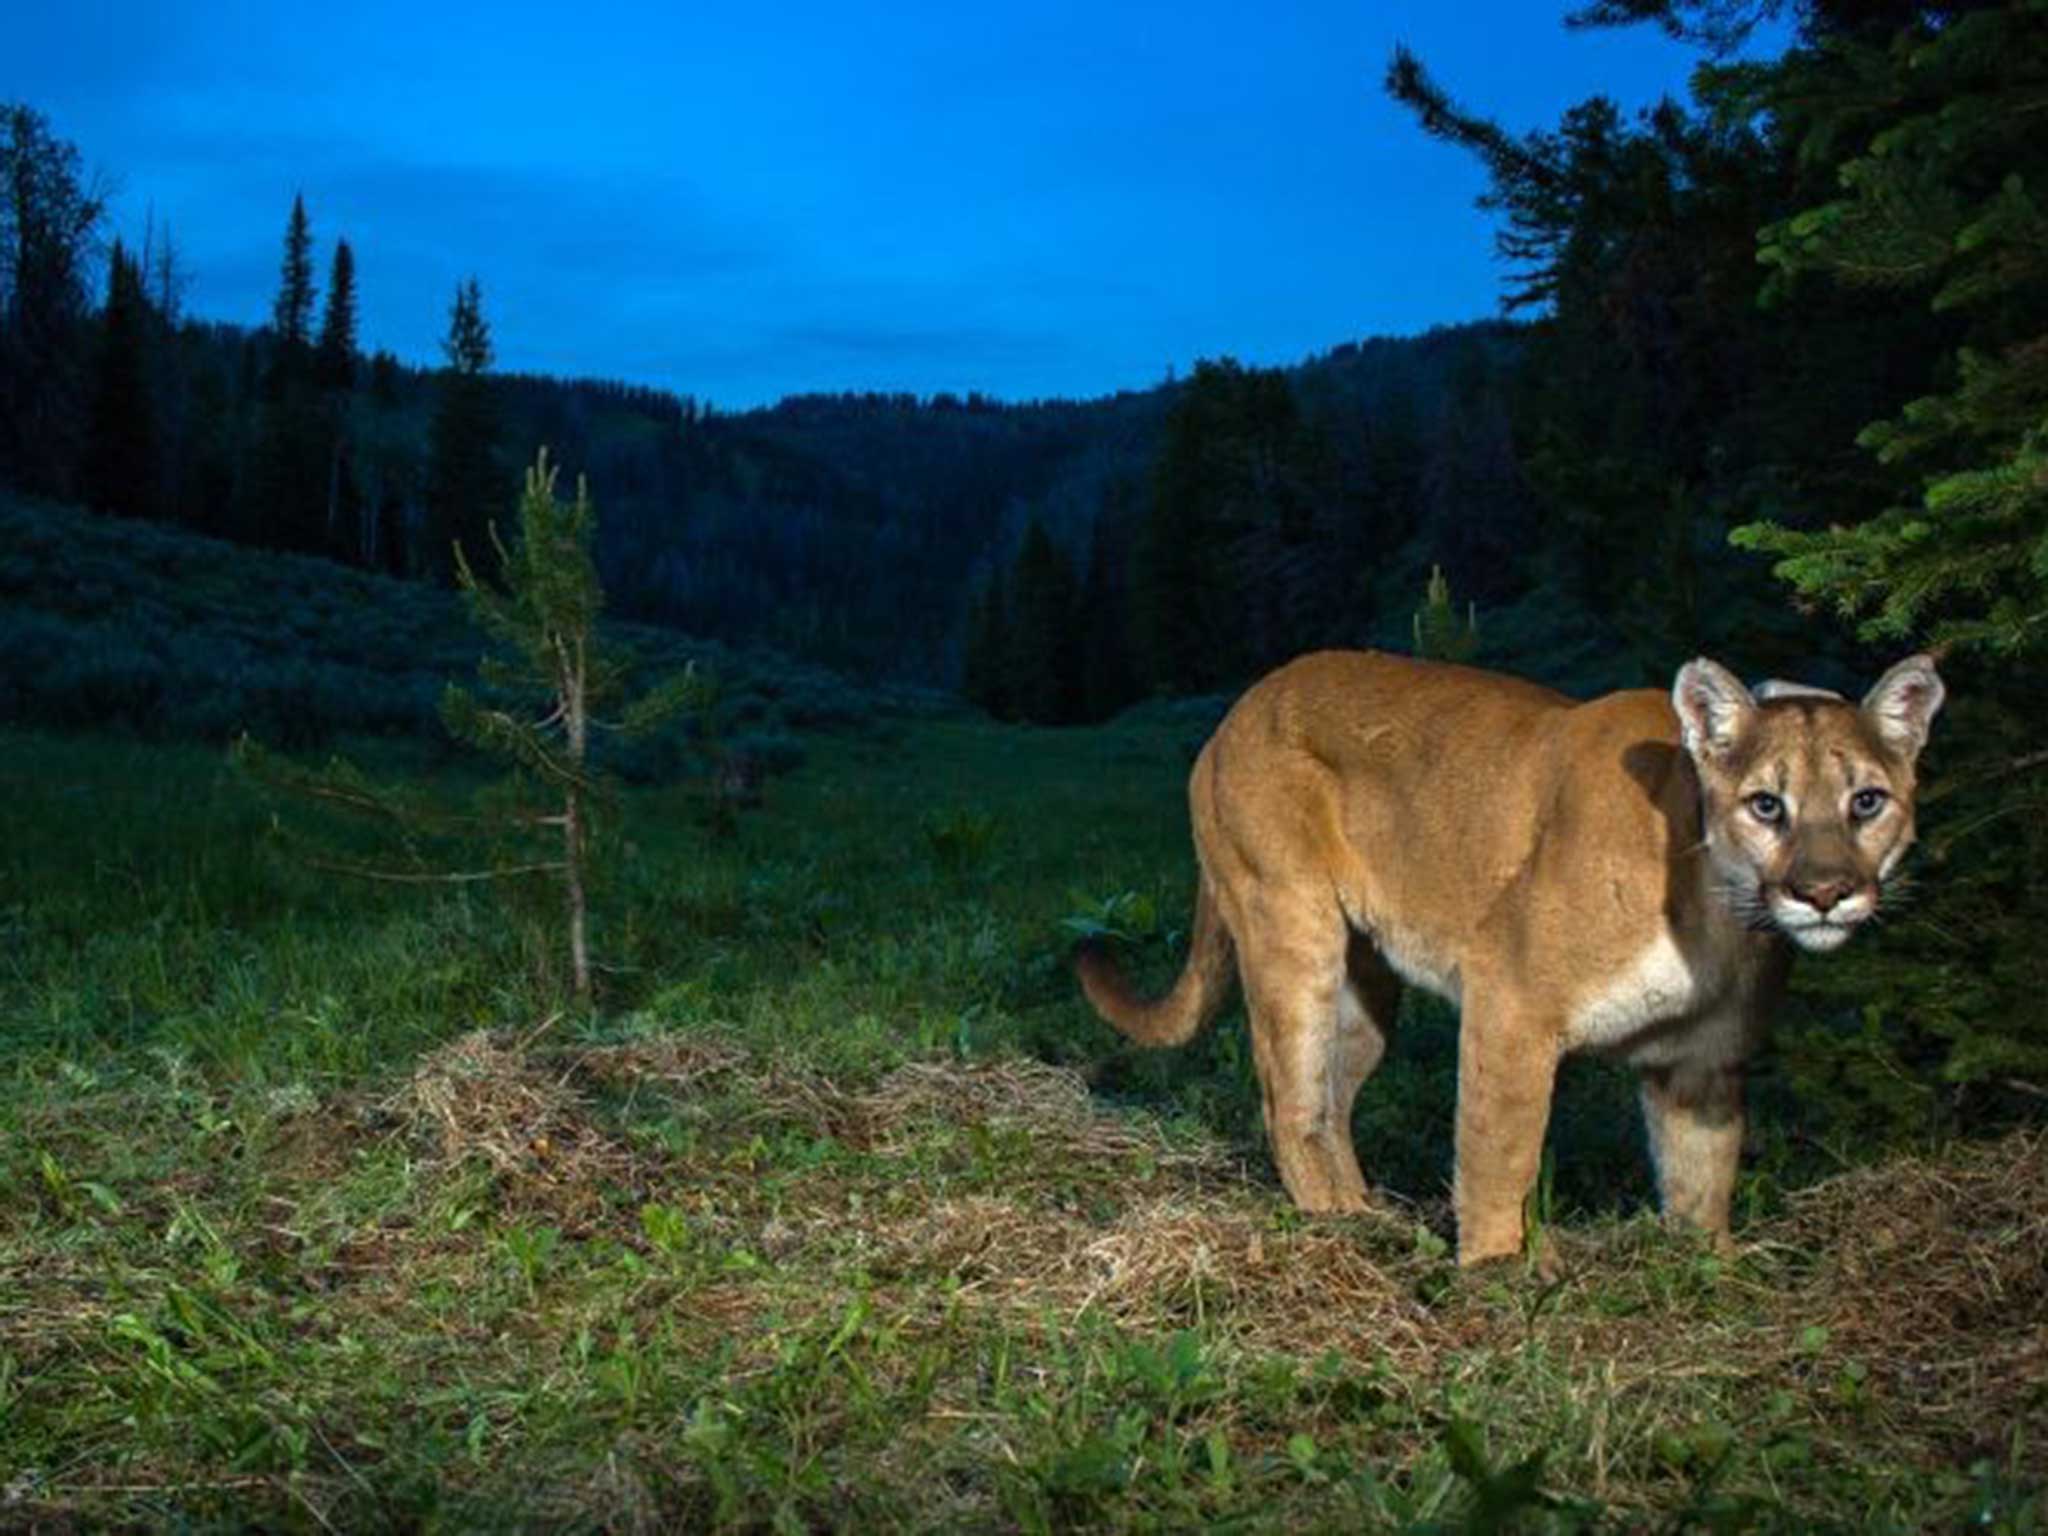 A cougar in northwest Wyoming as part of the Teton Cougar Project research effort